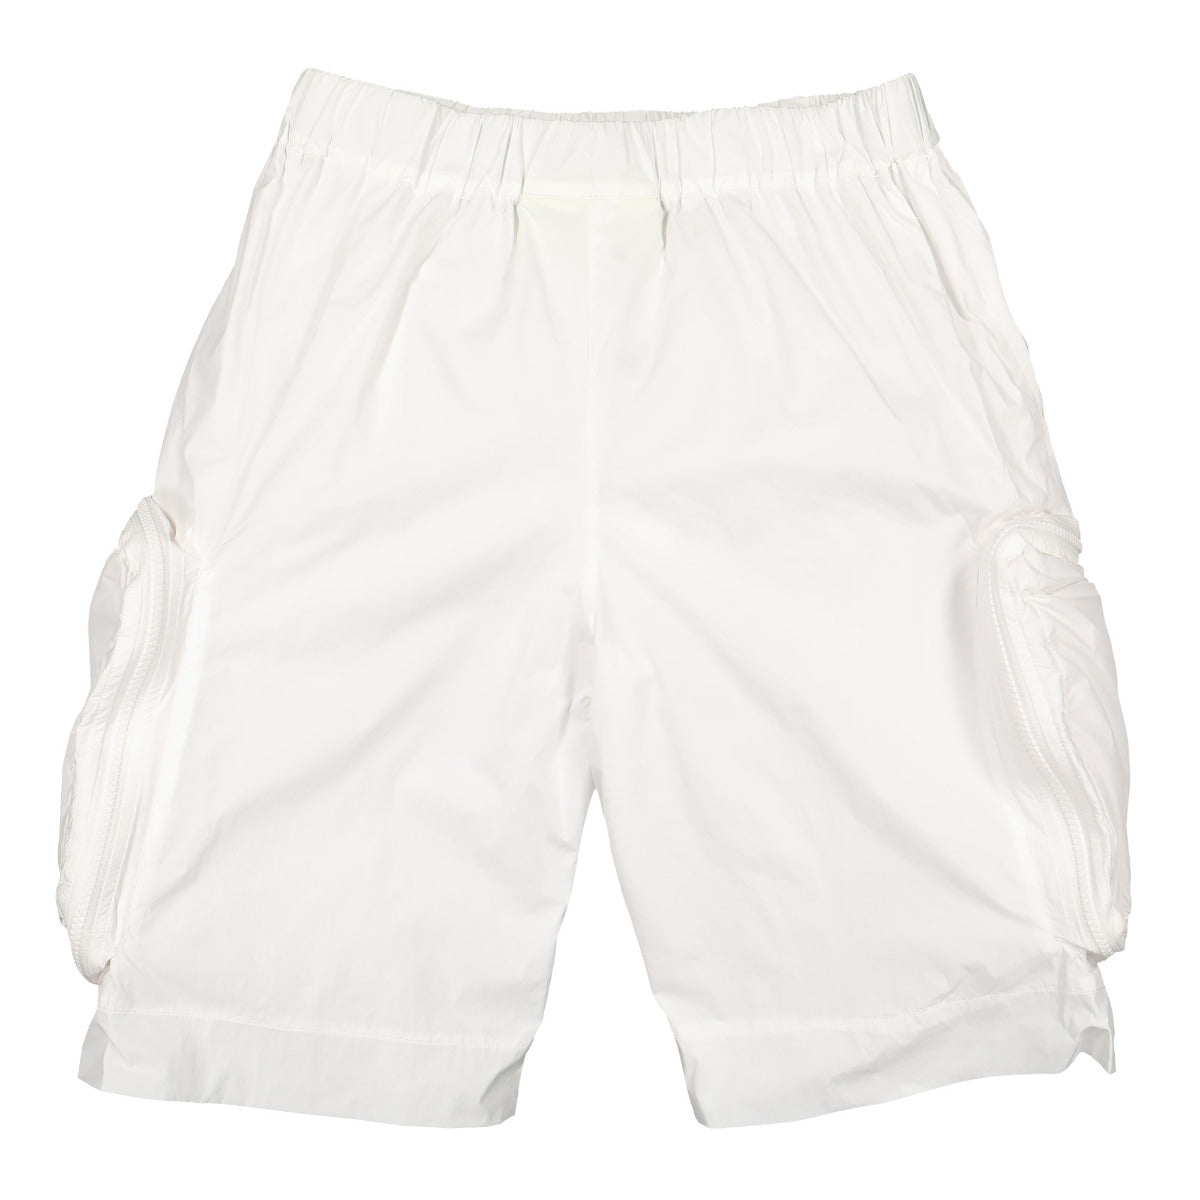 Nylon Short with Removable Bag Pockets